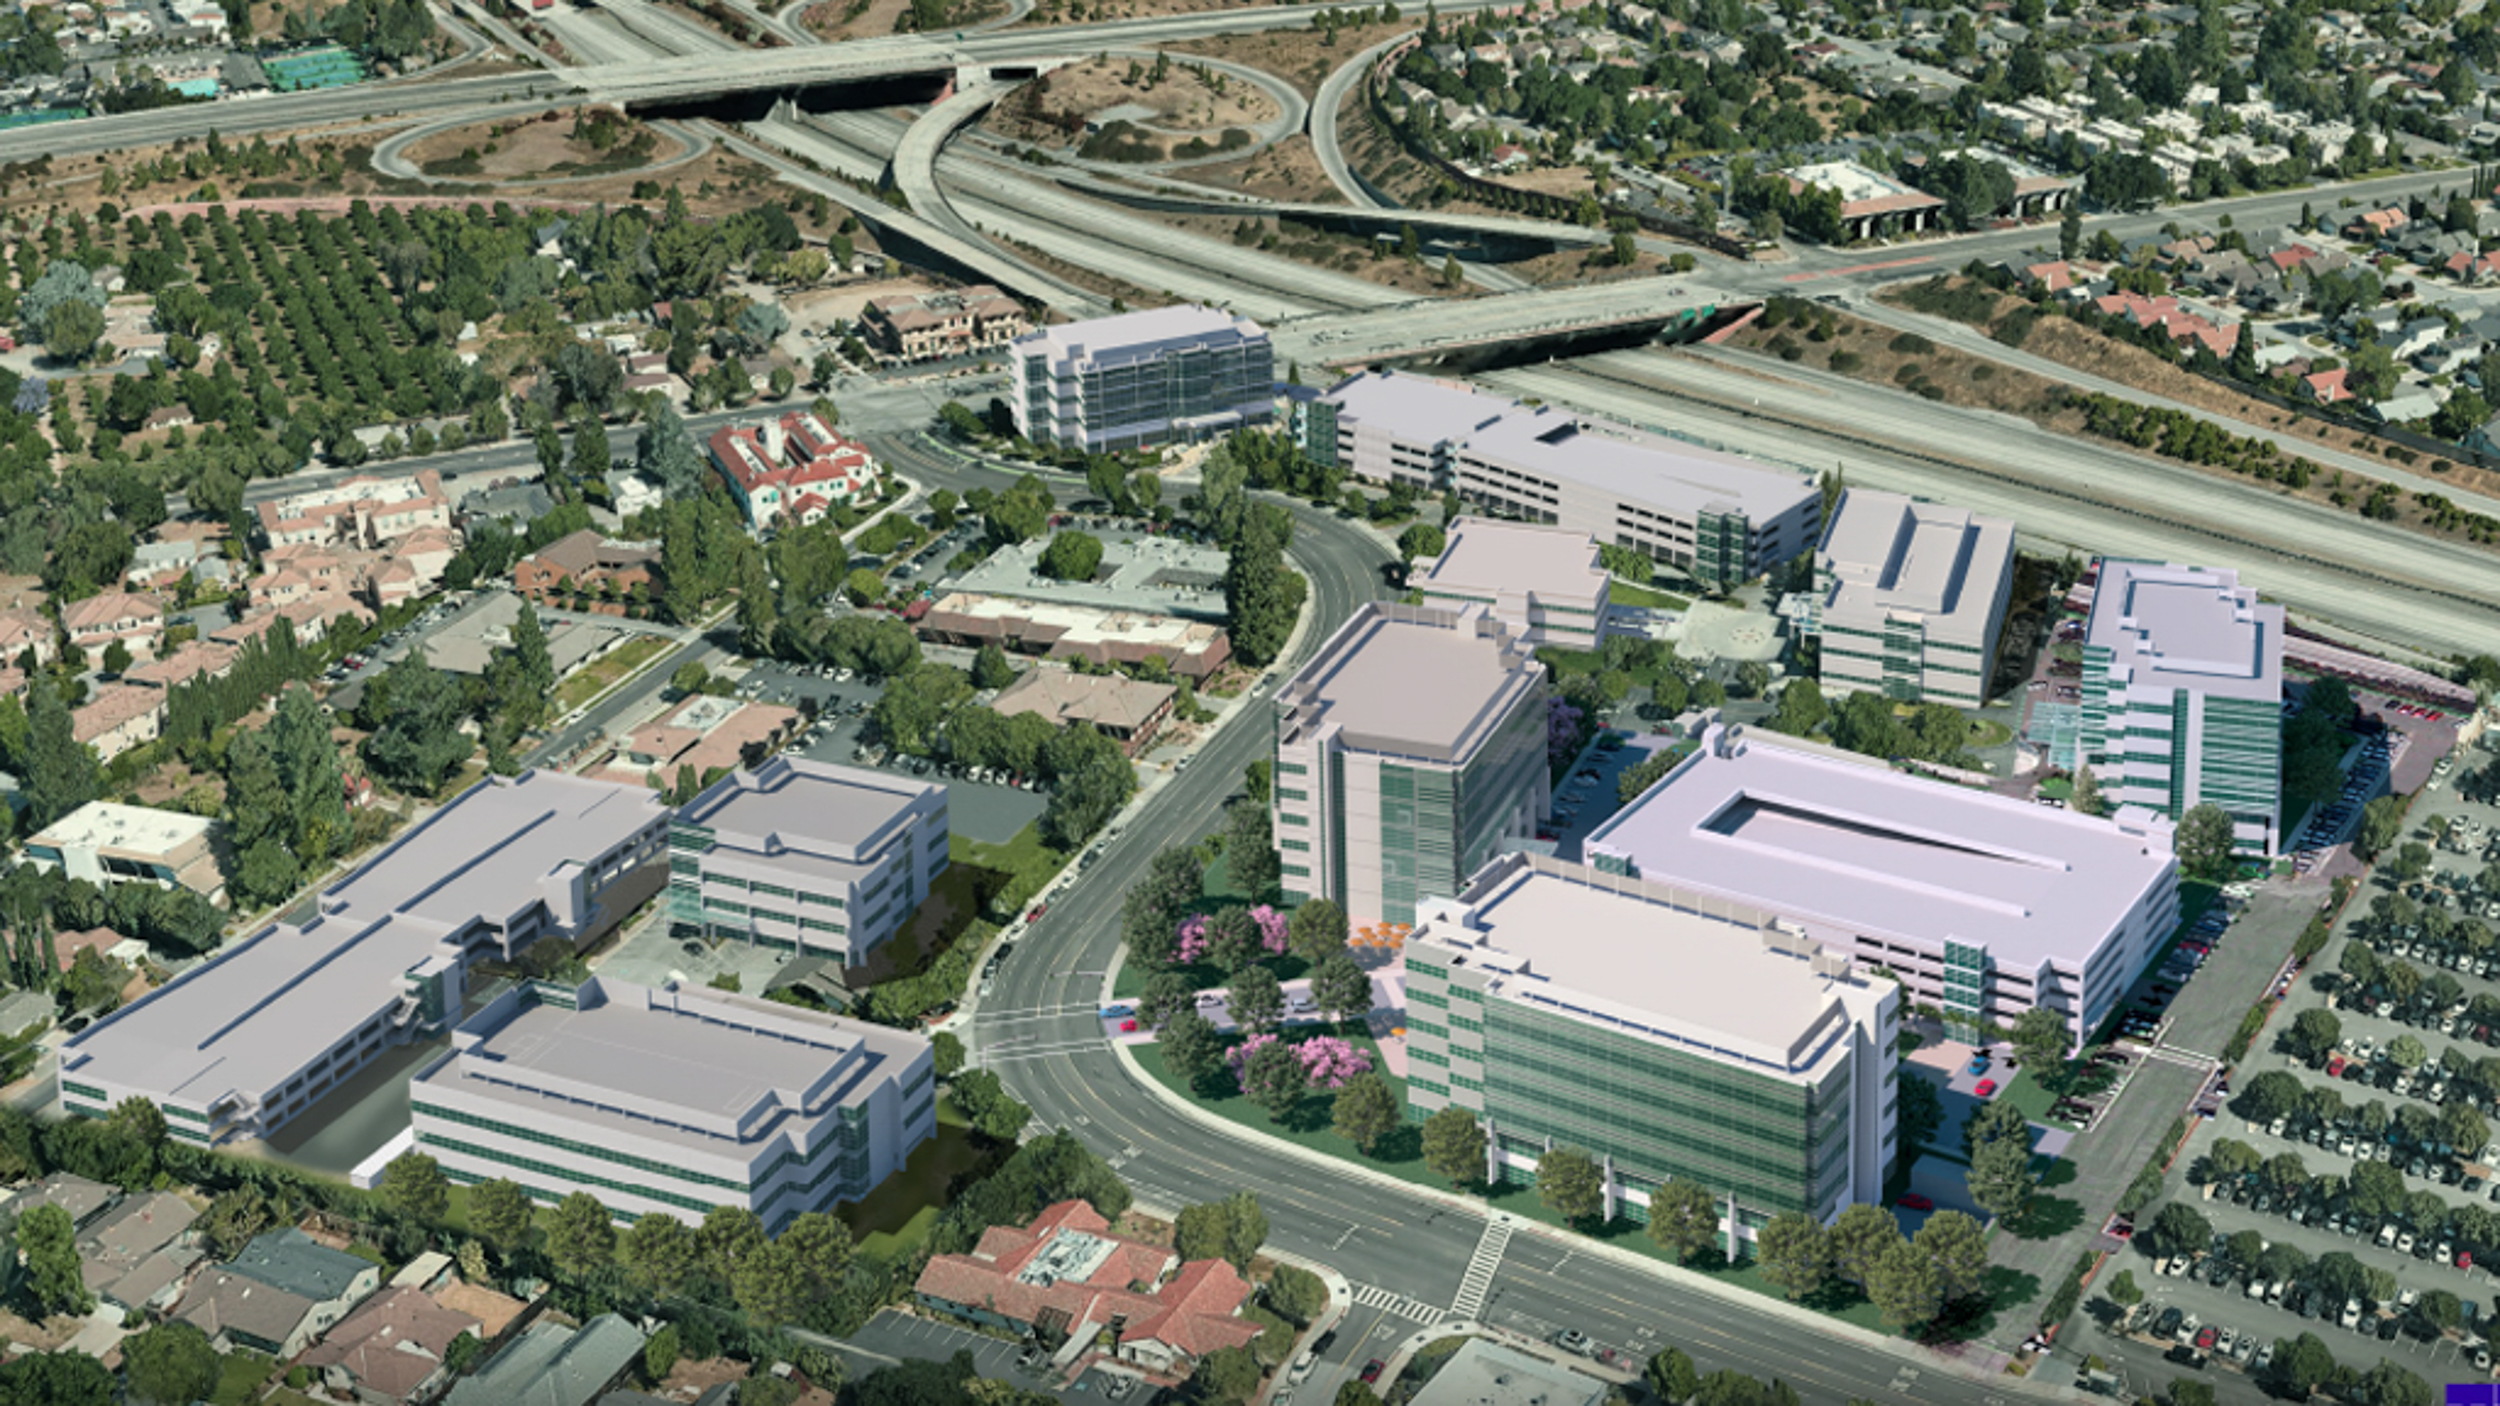 Samaritan Medical Center expansion aerial view, rendering by RBB Architects